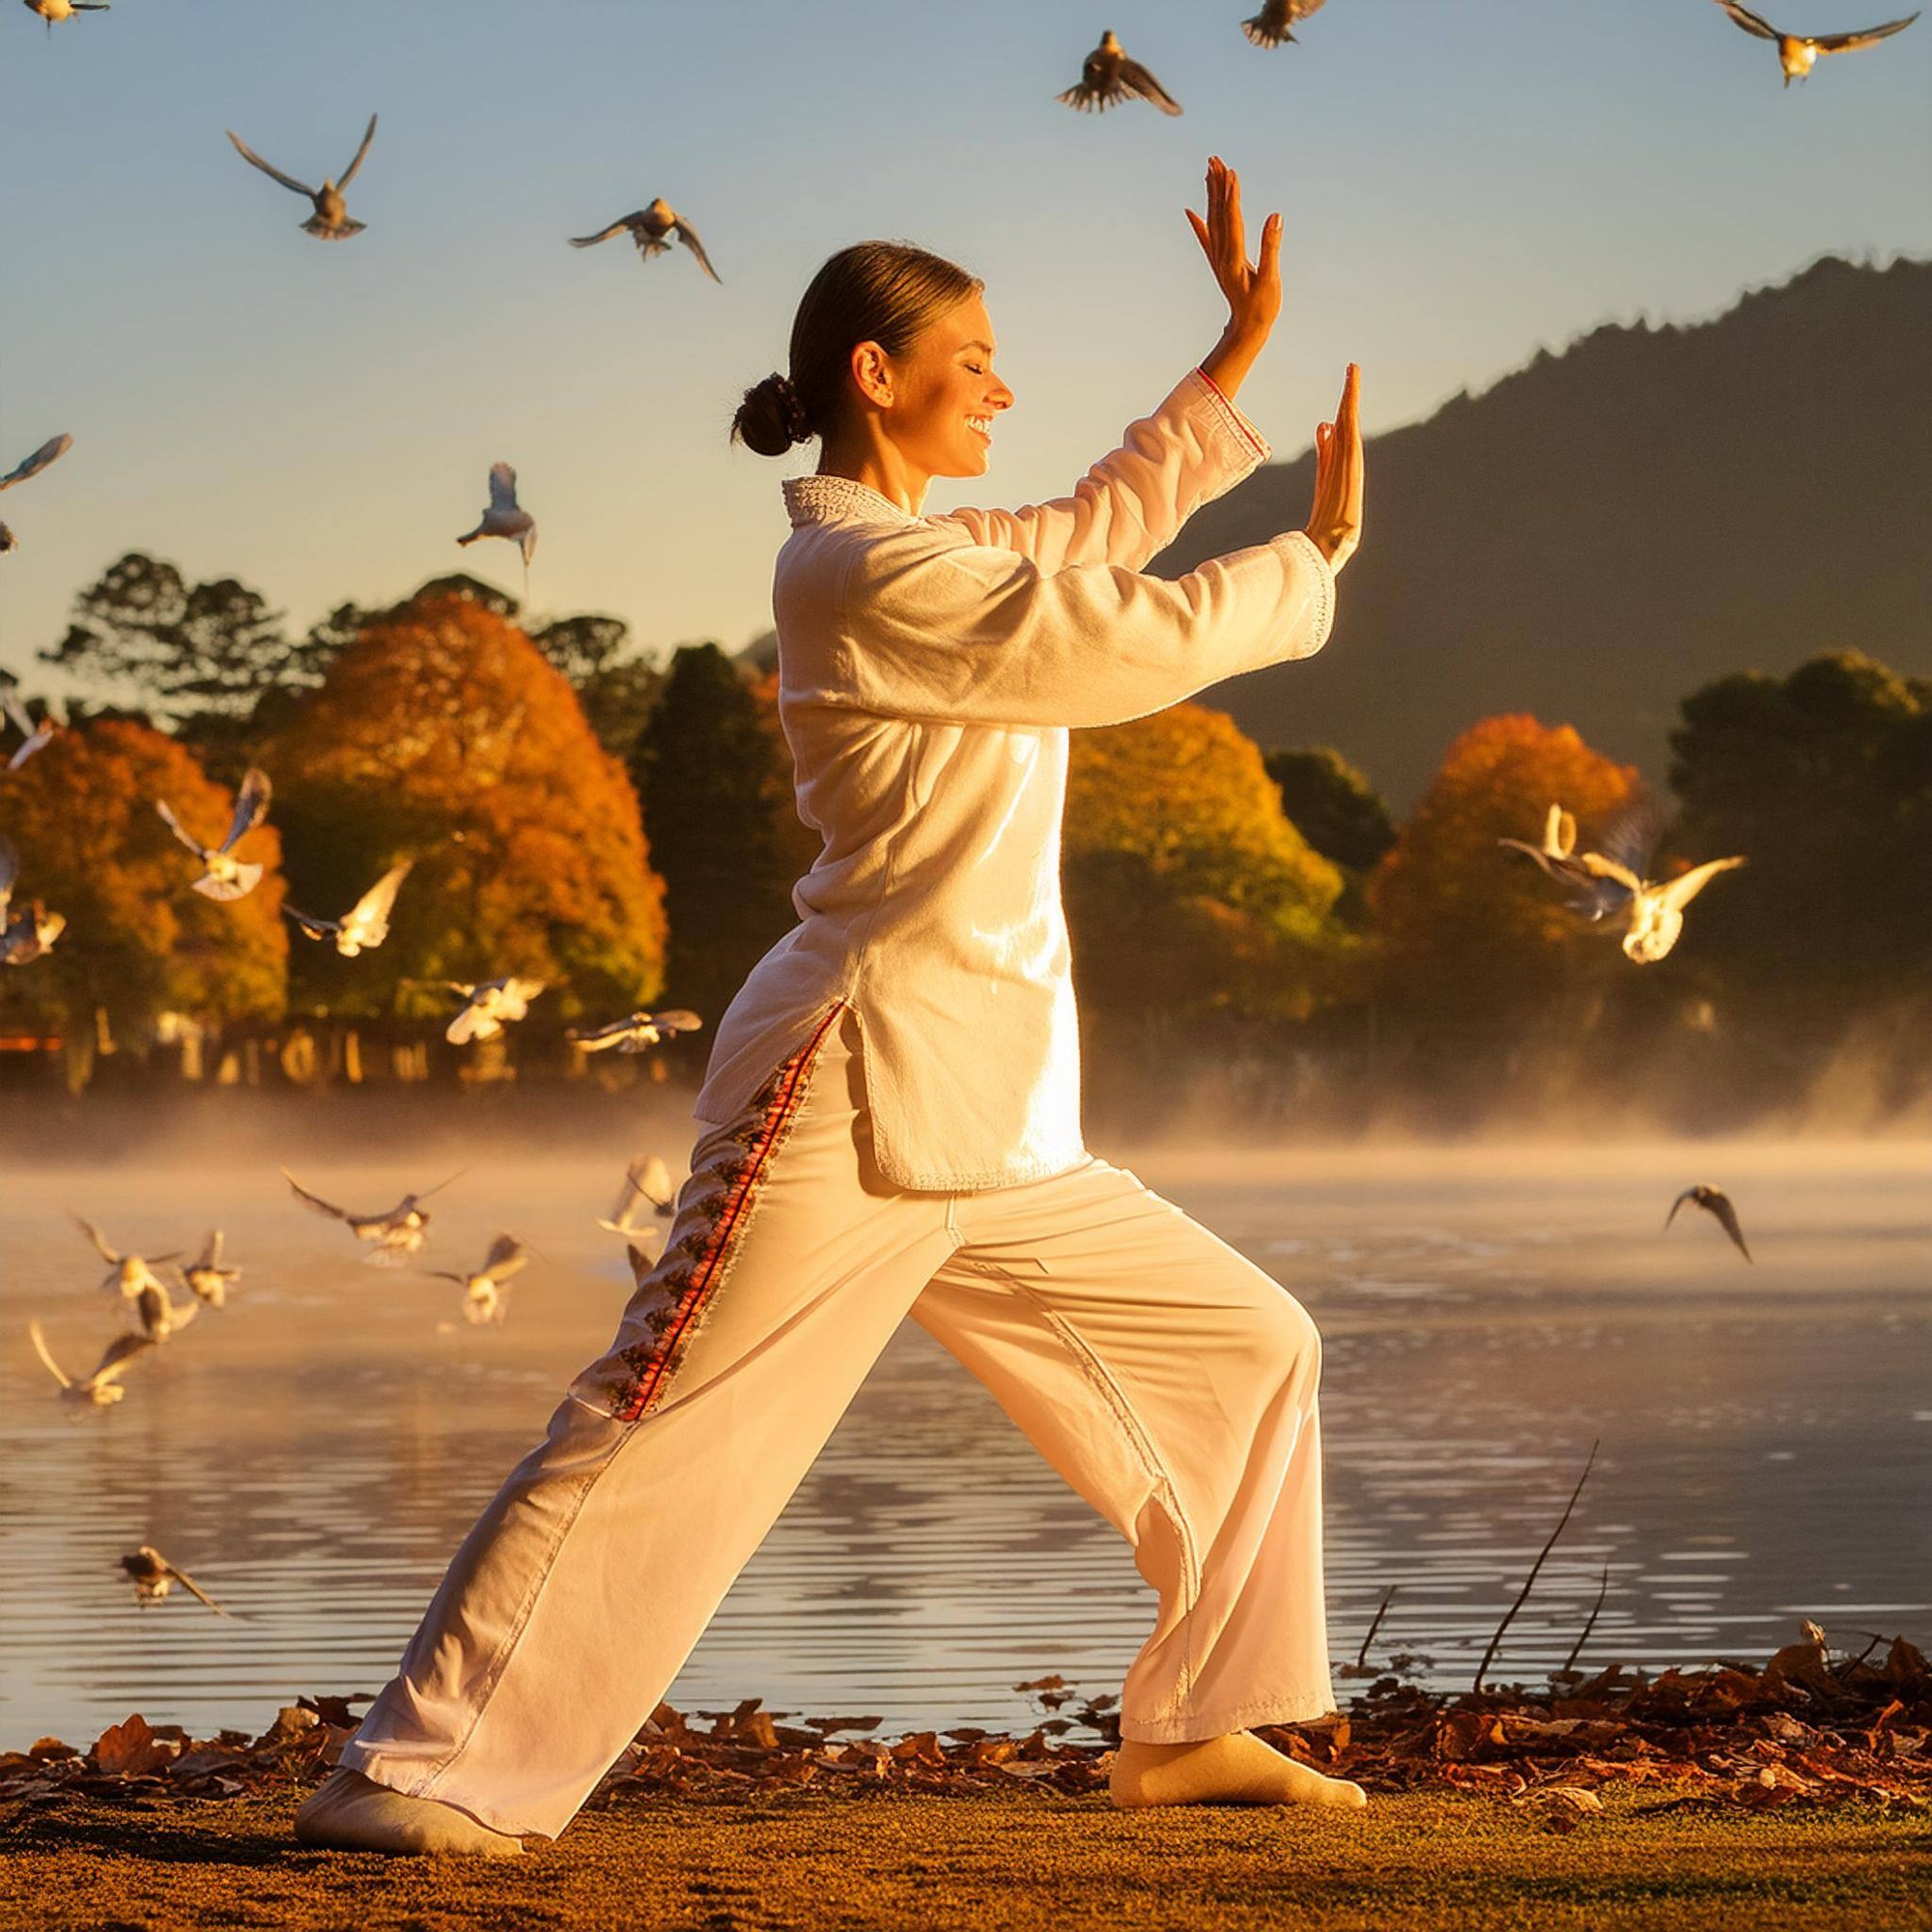 Firefly a european lady in her 30s, doing tai chi in golden morning sunshine by a lake ,highlighting (1)